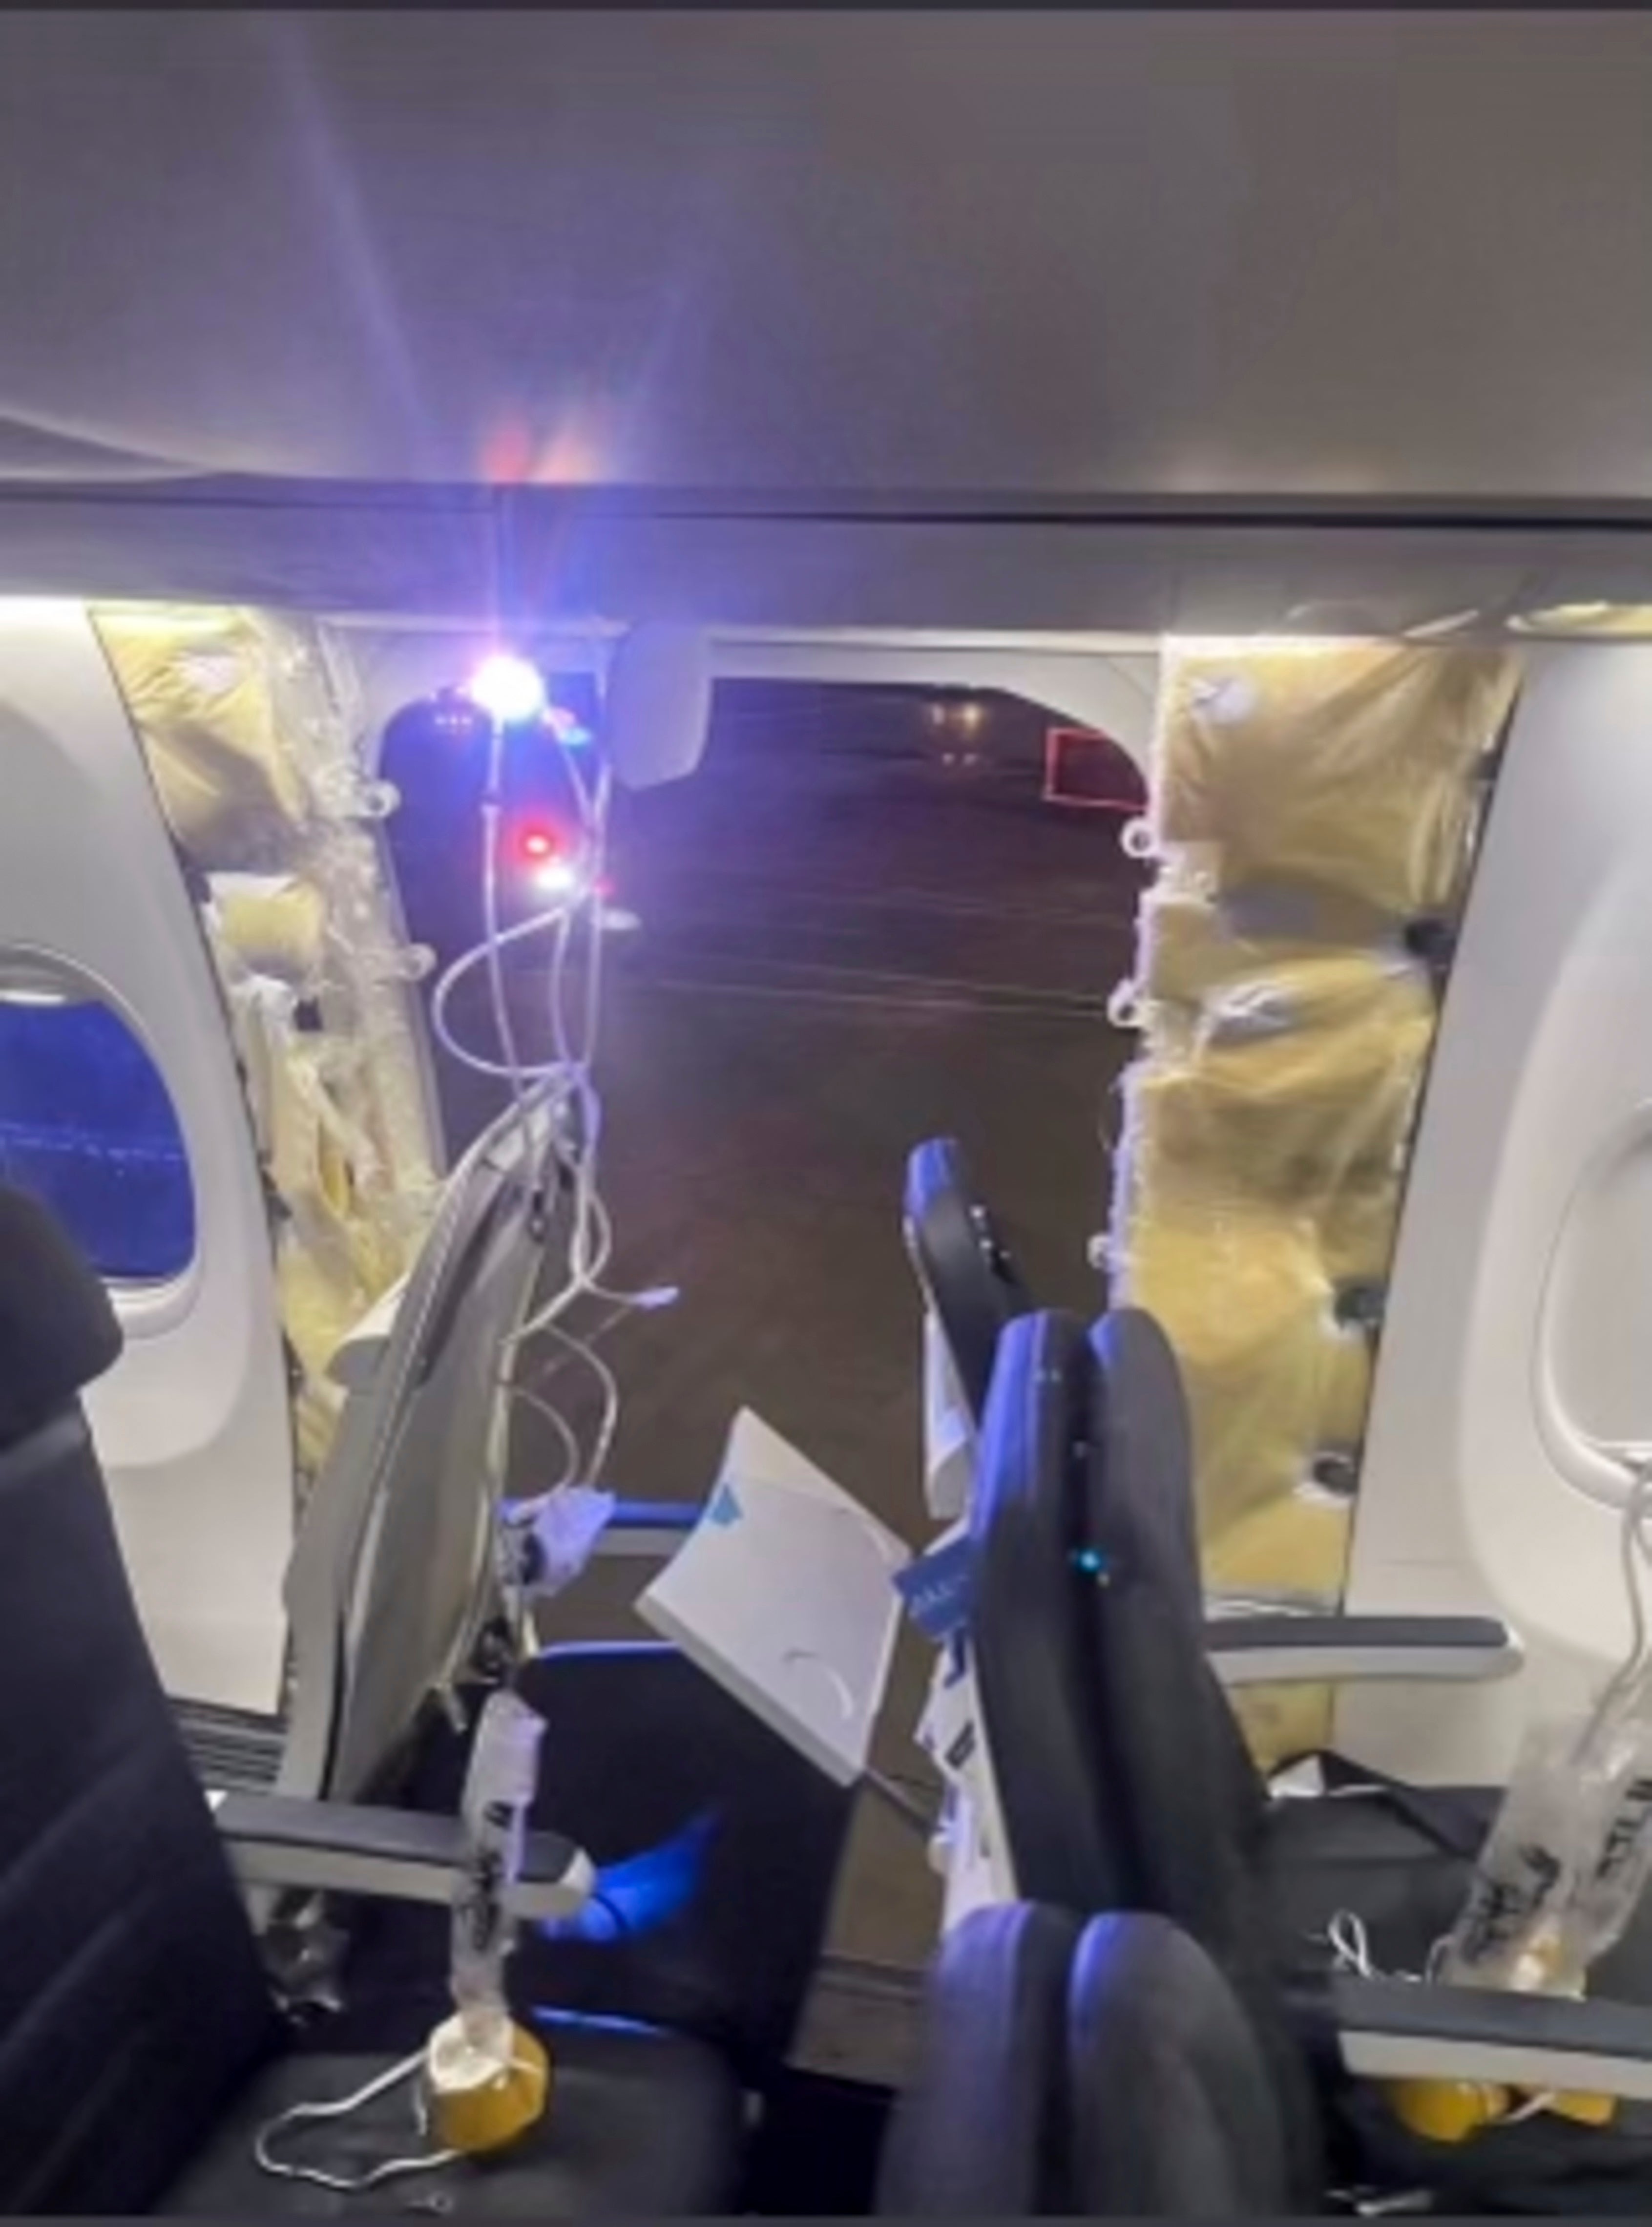 Boeing’s manufacturing process has faced scrutiny after a series of high-profile incidents, including a door plug blowing out of an Alaska Airlines flight at 16,000 feet.